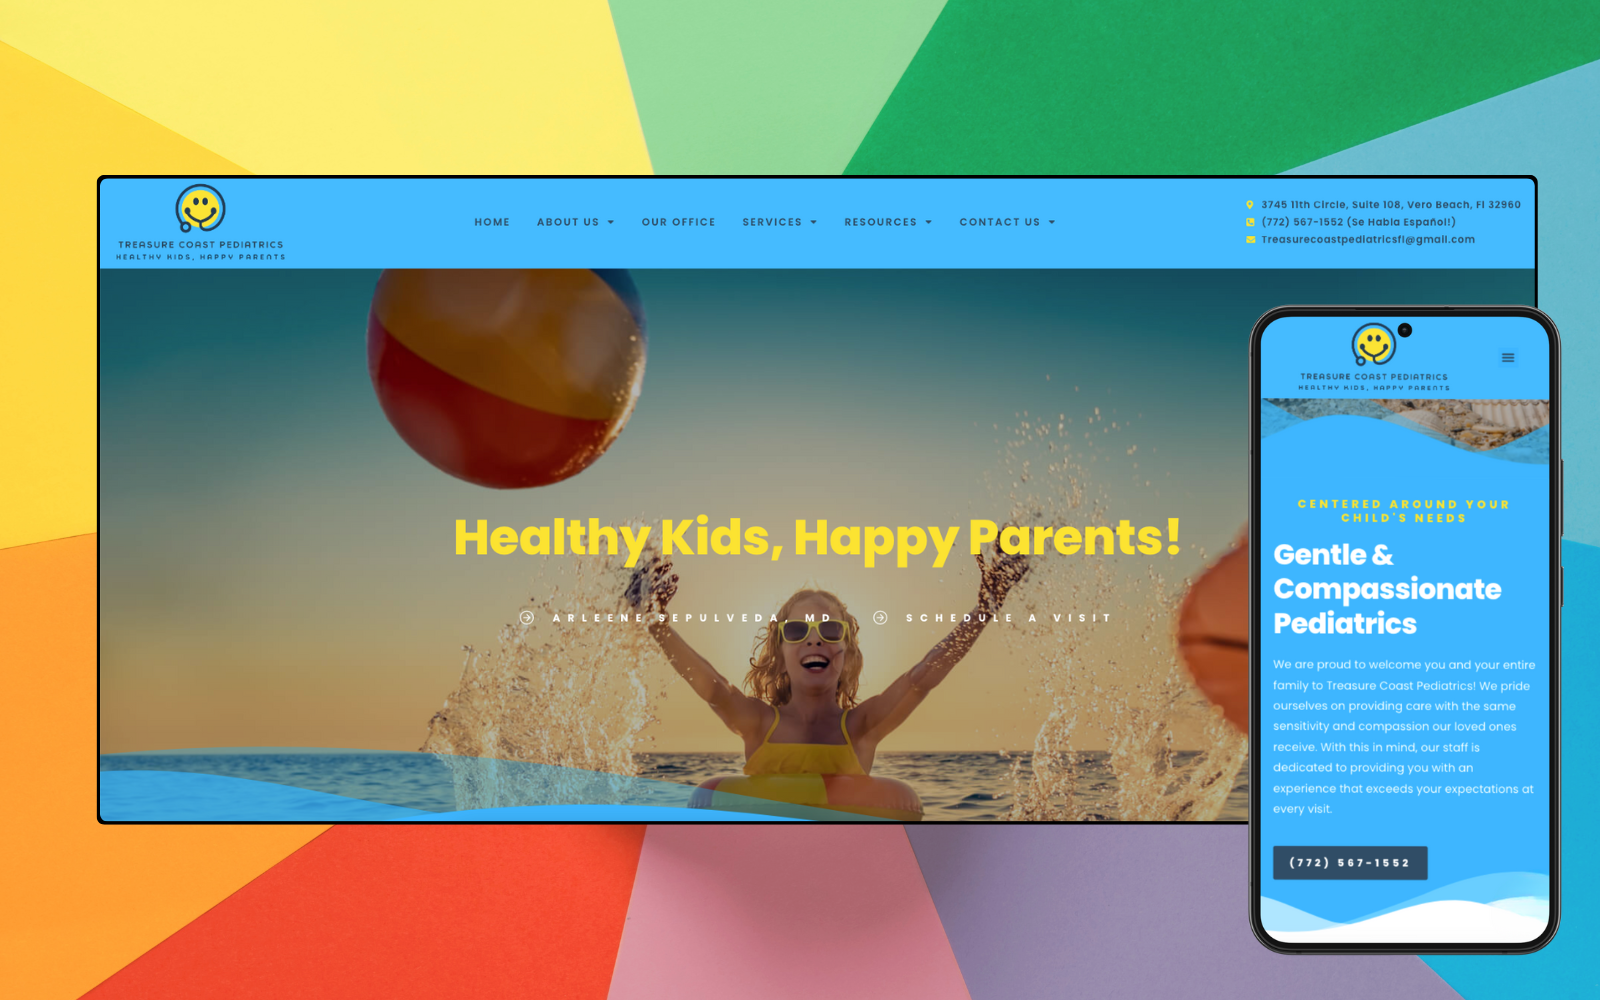 A website design showcasing healthy kids and happy parents.